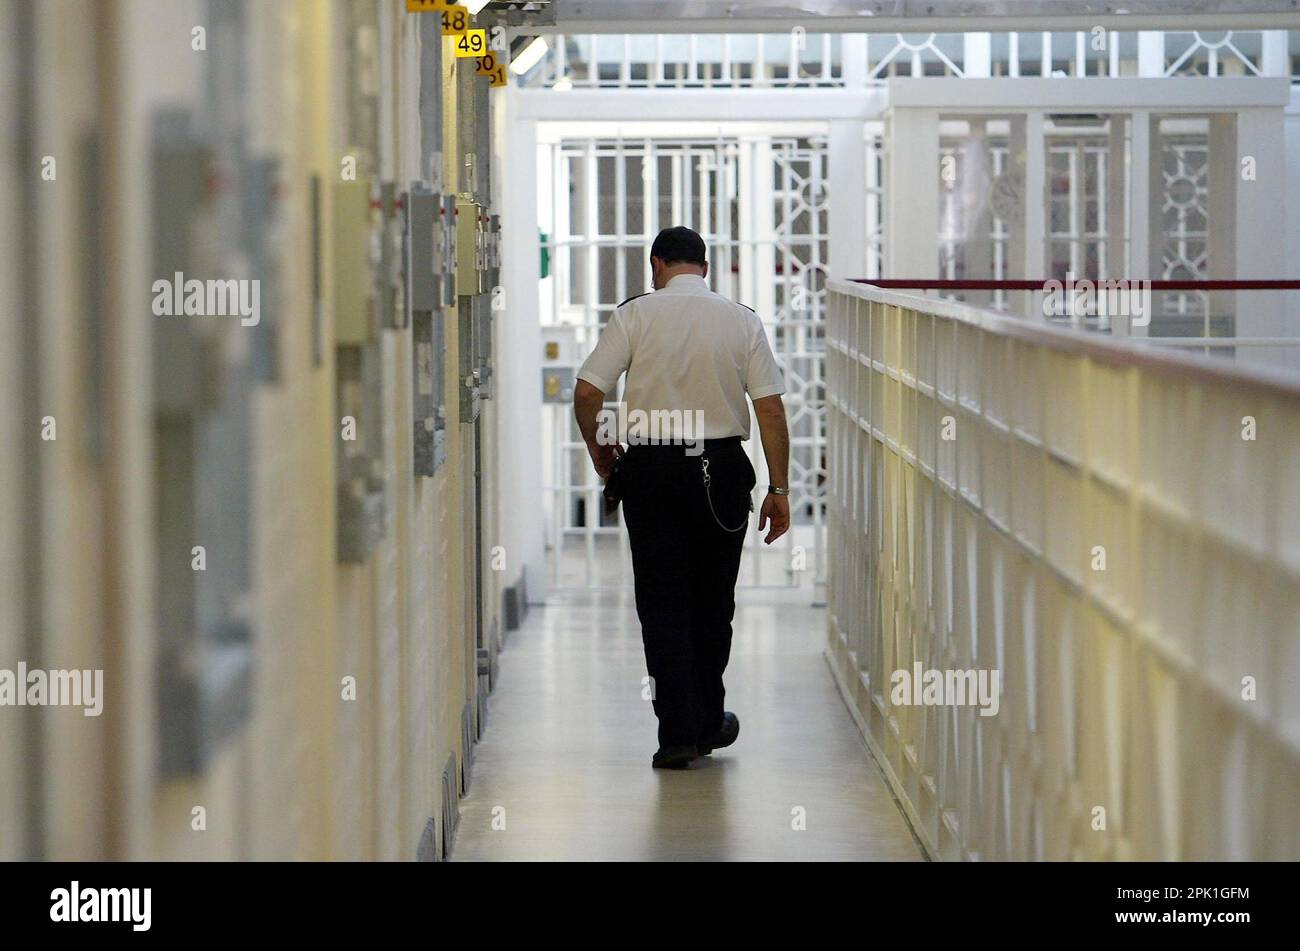 File photo dated 25/03/04 of a general view of inside a prison. Prison officers can work 24-hour shifts at weekends while inmates are sometimes unable to access medical care or do basic tasks, a report has found. His Majesty's Inspectorate of Prisons found 60% of male prisoners and 66% of female inmates said they spend less than two hours out of their cell on a typical Saturday or Sunday. On a weekday 42% of male prisoners and 36% of female inmates said they spend less than two hours a day outside their cell. Issue date: Wednesday April 5, 2023. Stock Photo